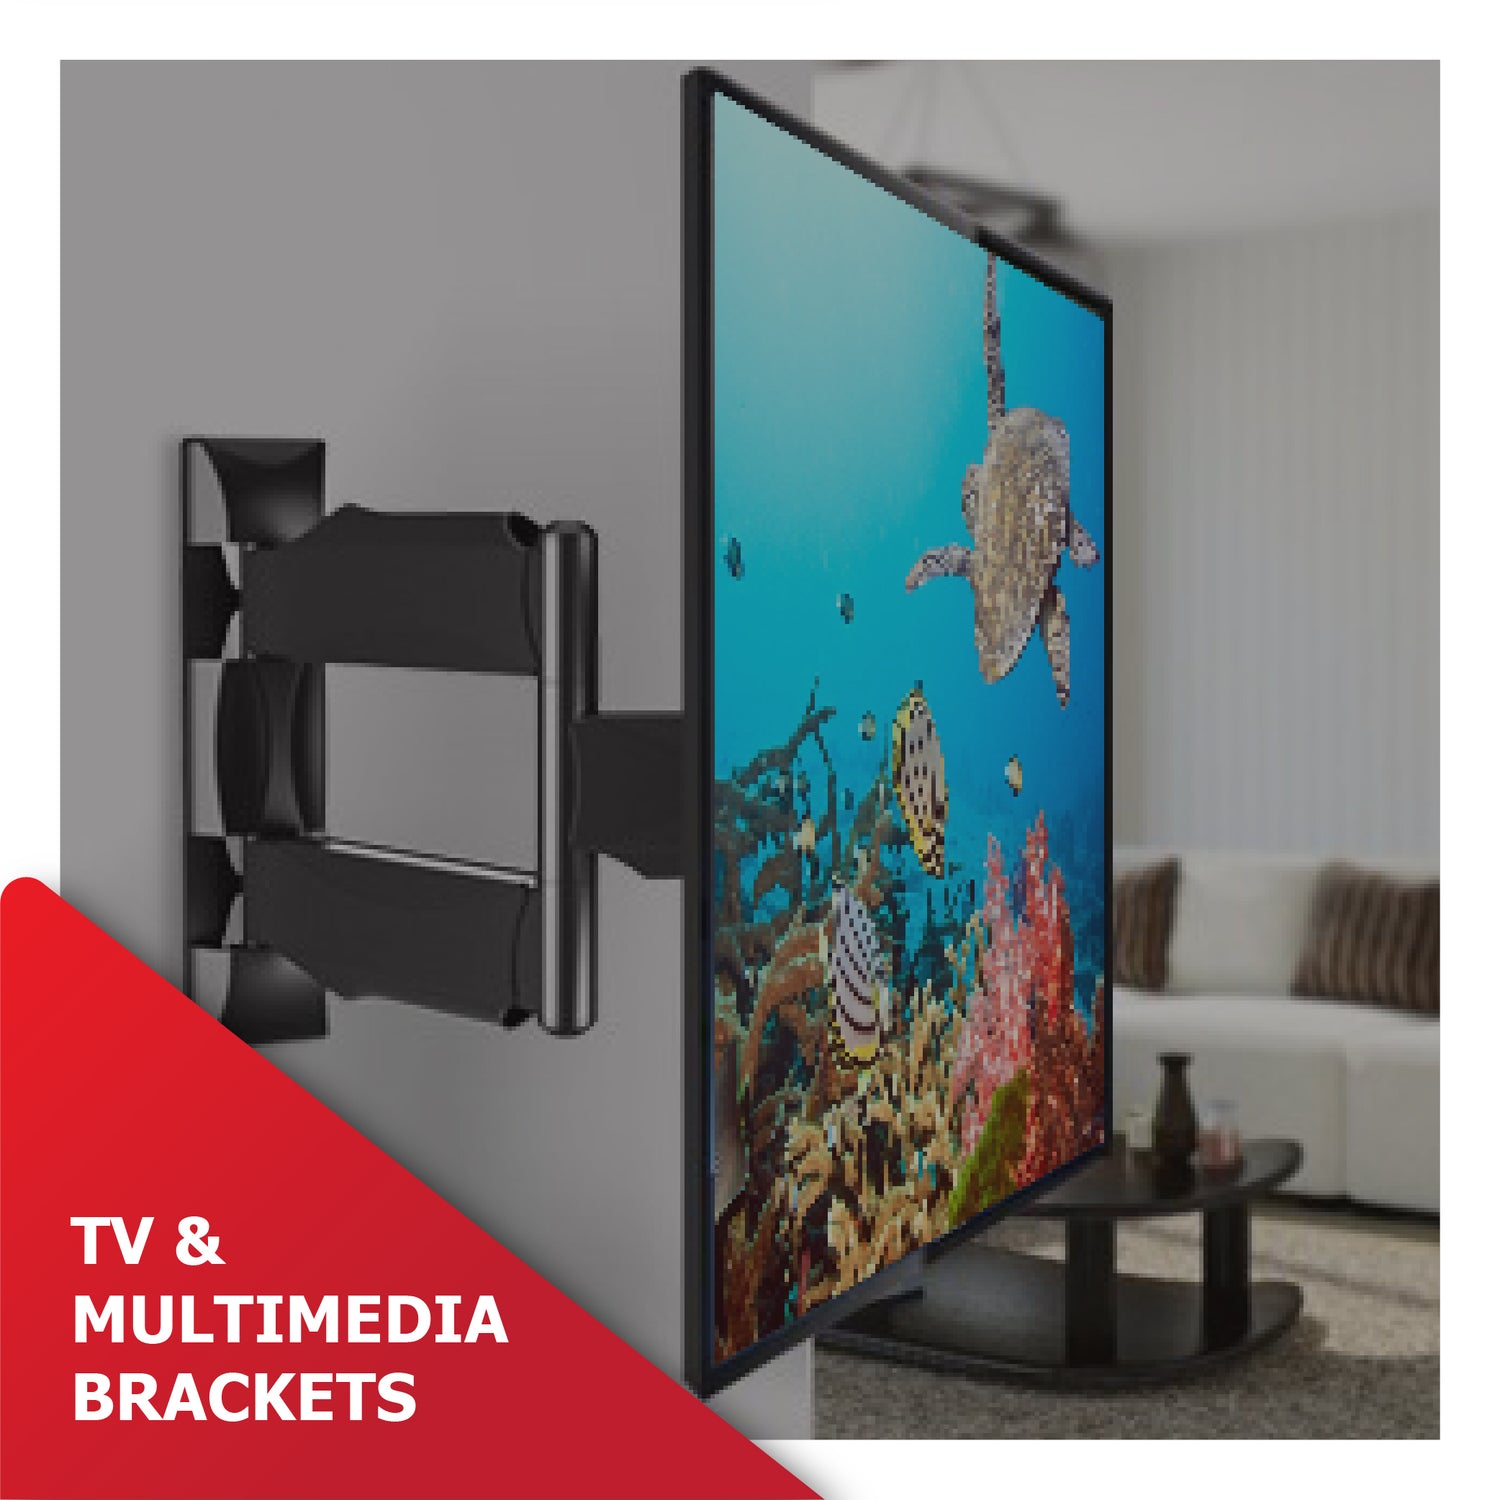 TV brackets for secure and space-saving wall mounting of your television.